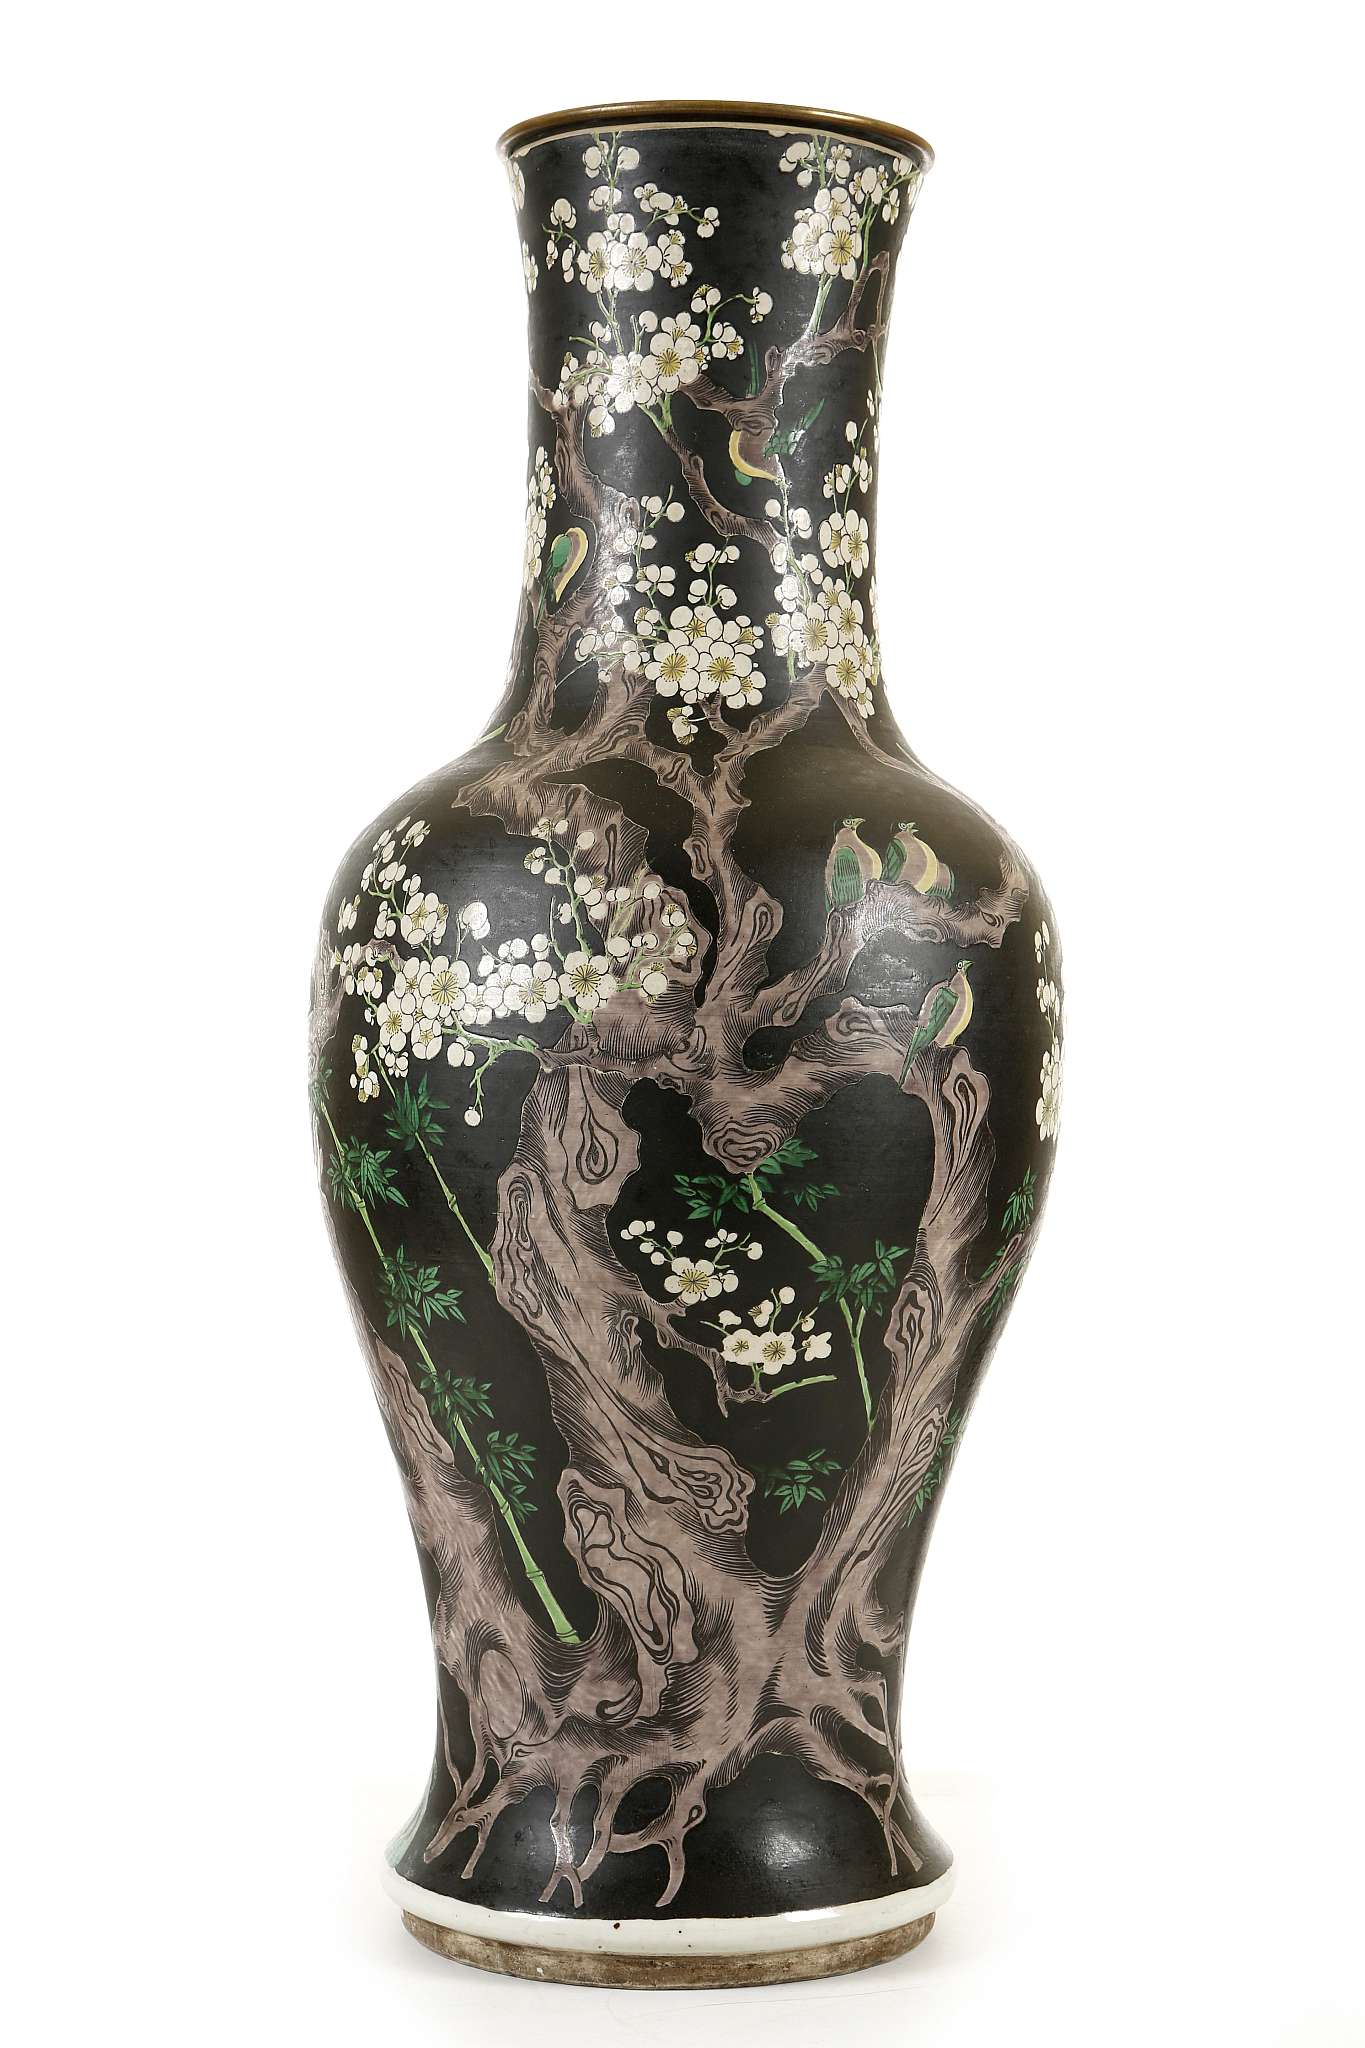 A LARGE CHINESE FAMILLE NOIRE VASE. Late Qing, 19th Century. Painted with a gnarled flowering plum